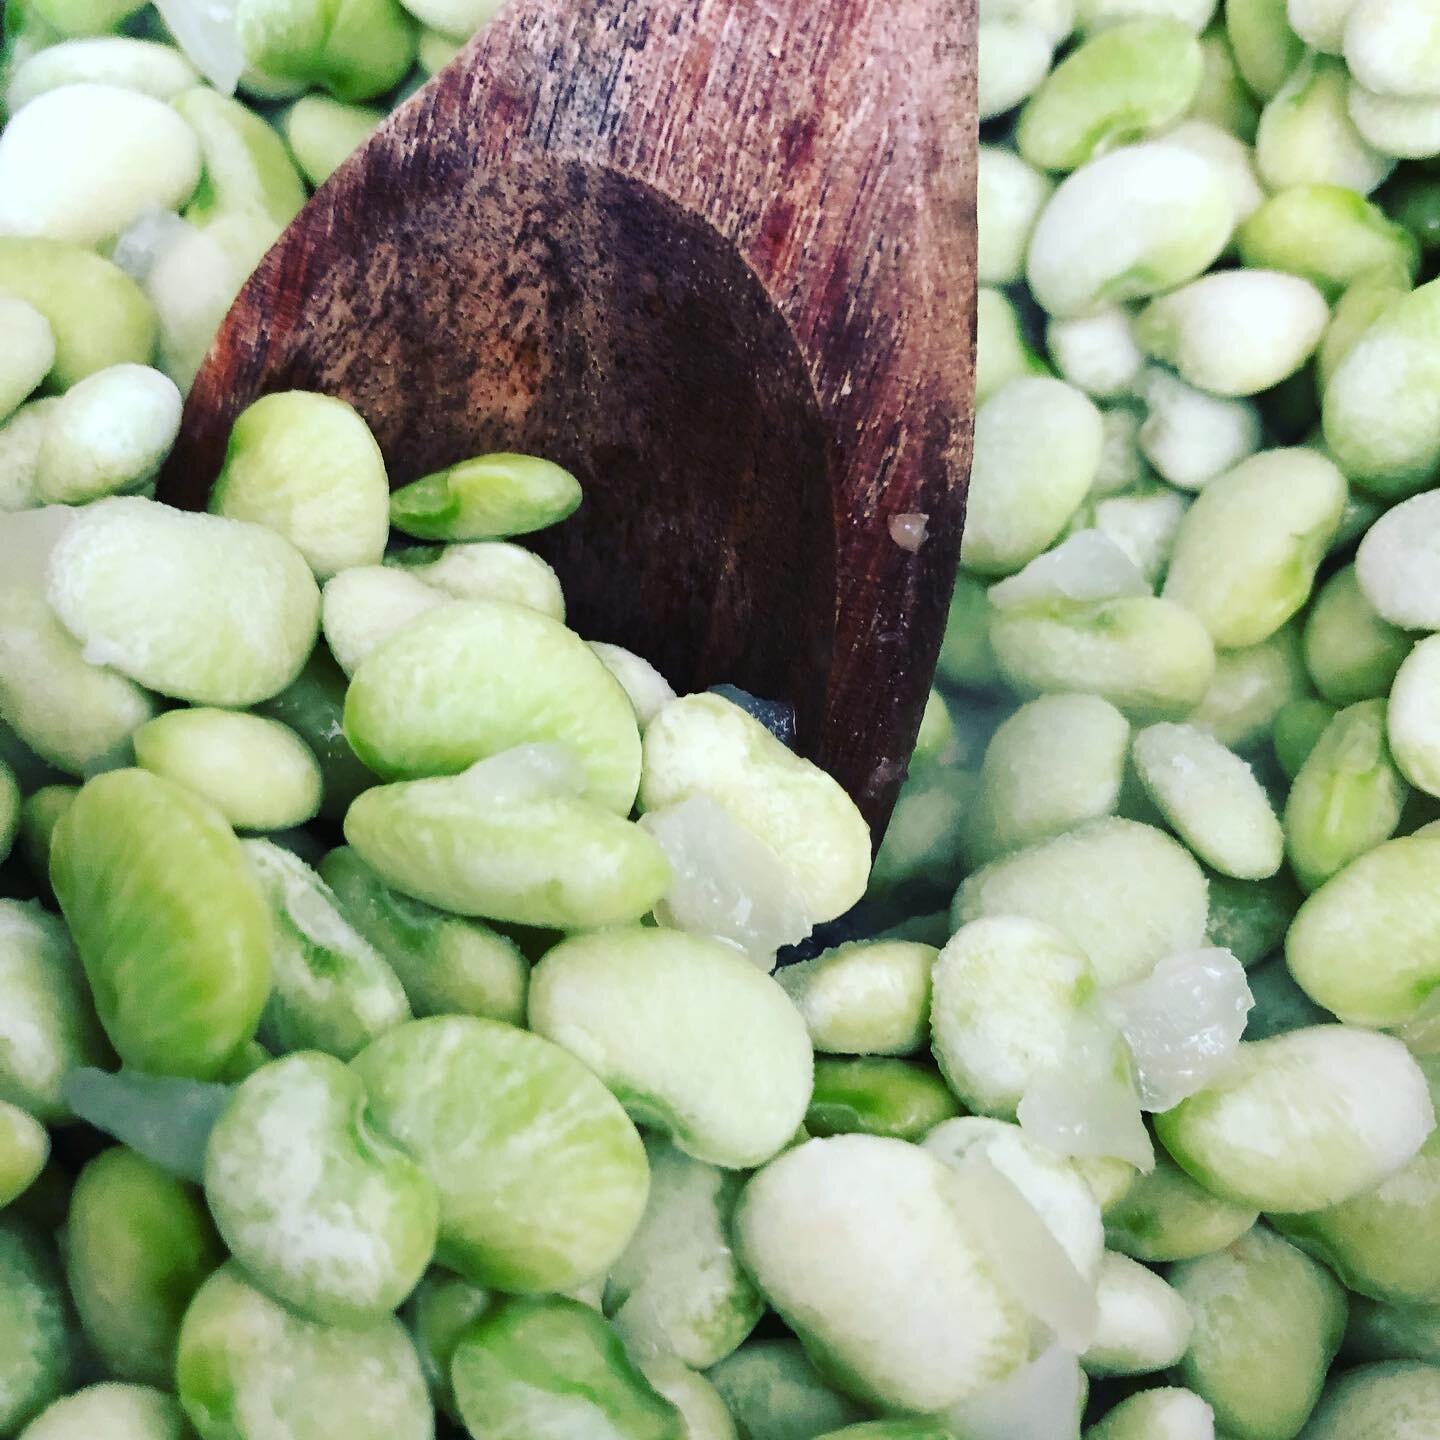 Convenience food at its best!  Lima beans were on the menu tonight, it&rsquo;s not a very popular food but we like them around here.  Preparing these reminded me just how great frozen fruit and vegetables are (Lima beans are legumes, but you catch my